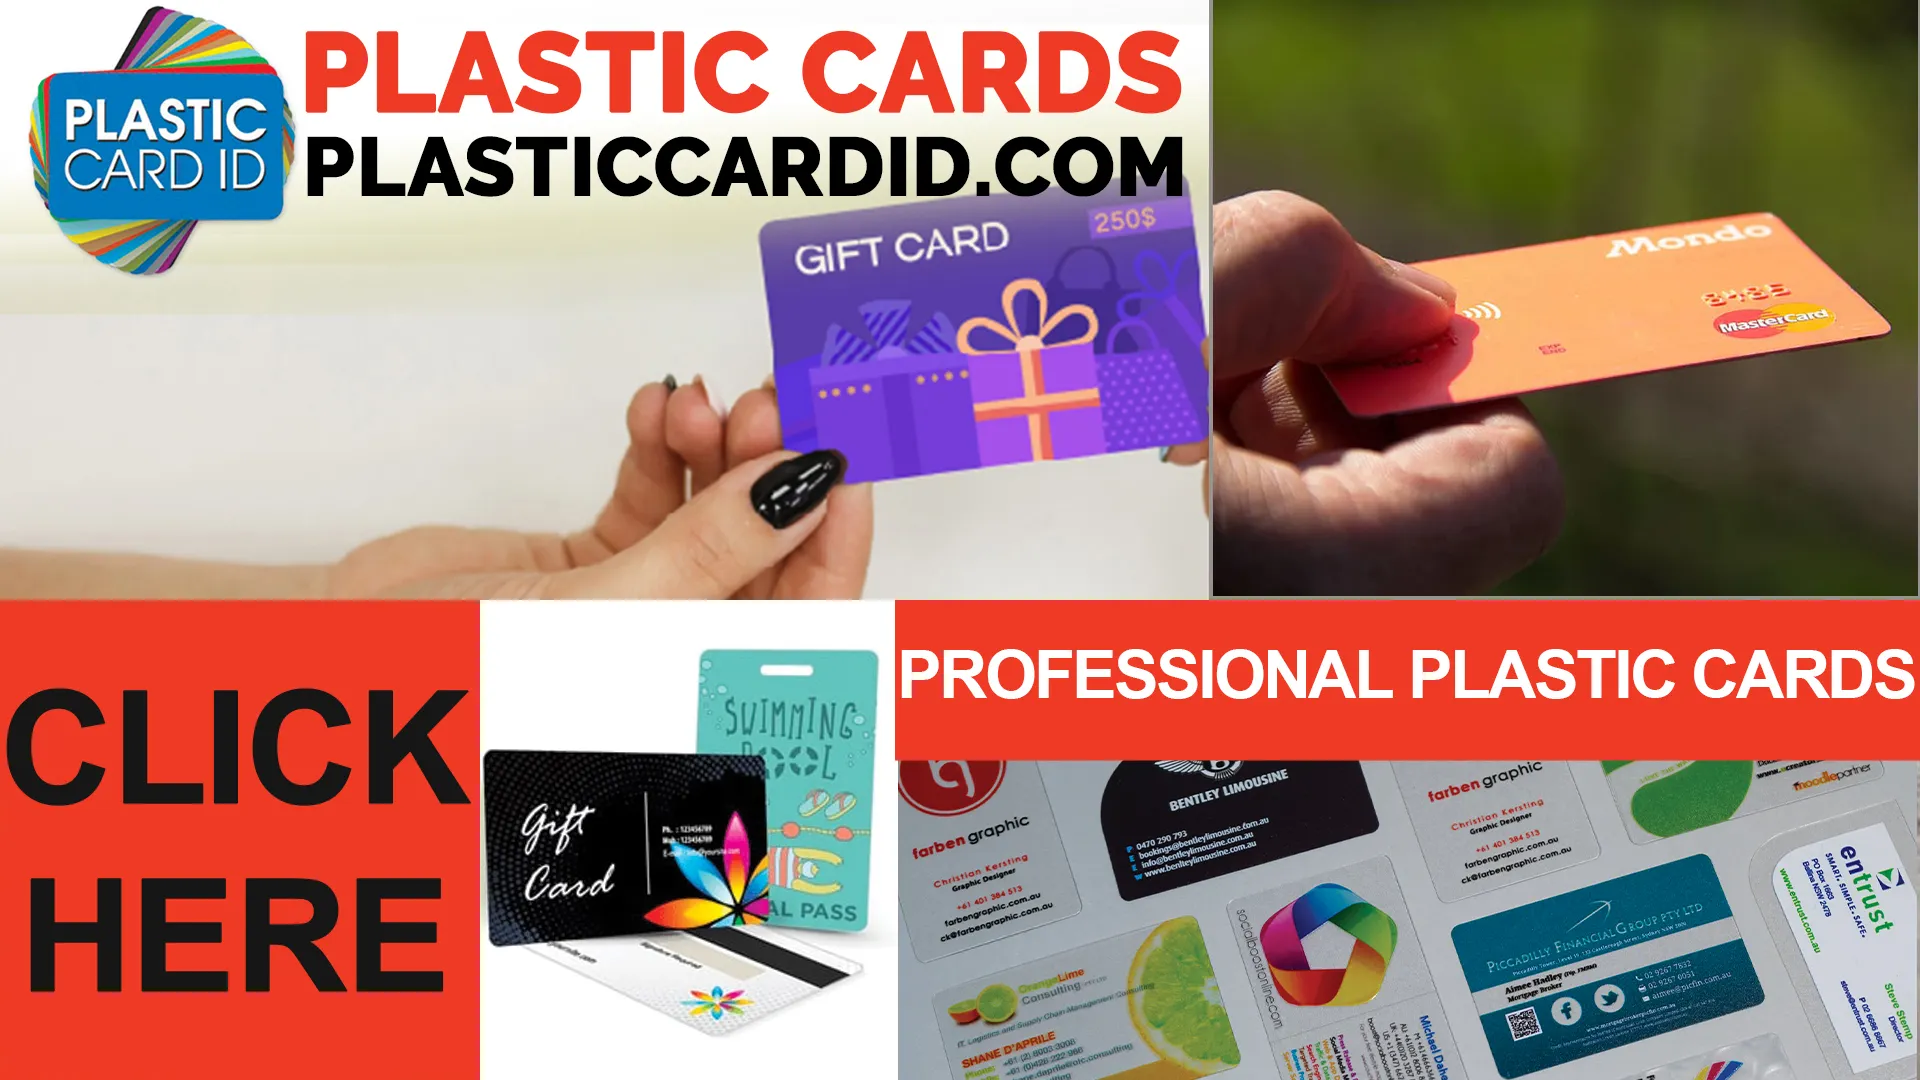 Welcome to the Future of Plastic Cards with Plastic Card ID
